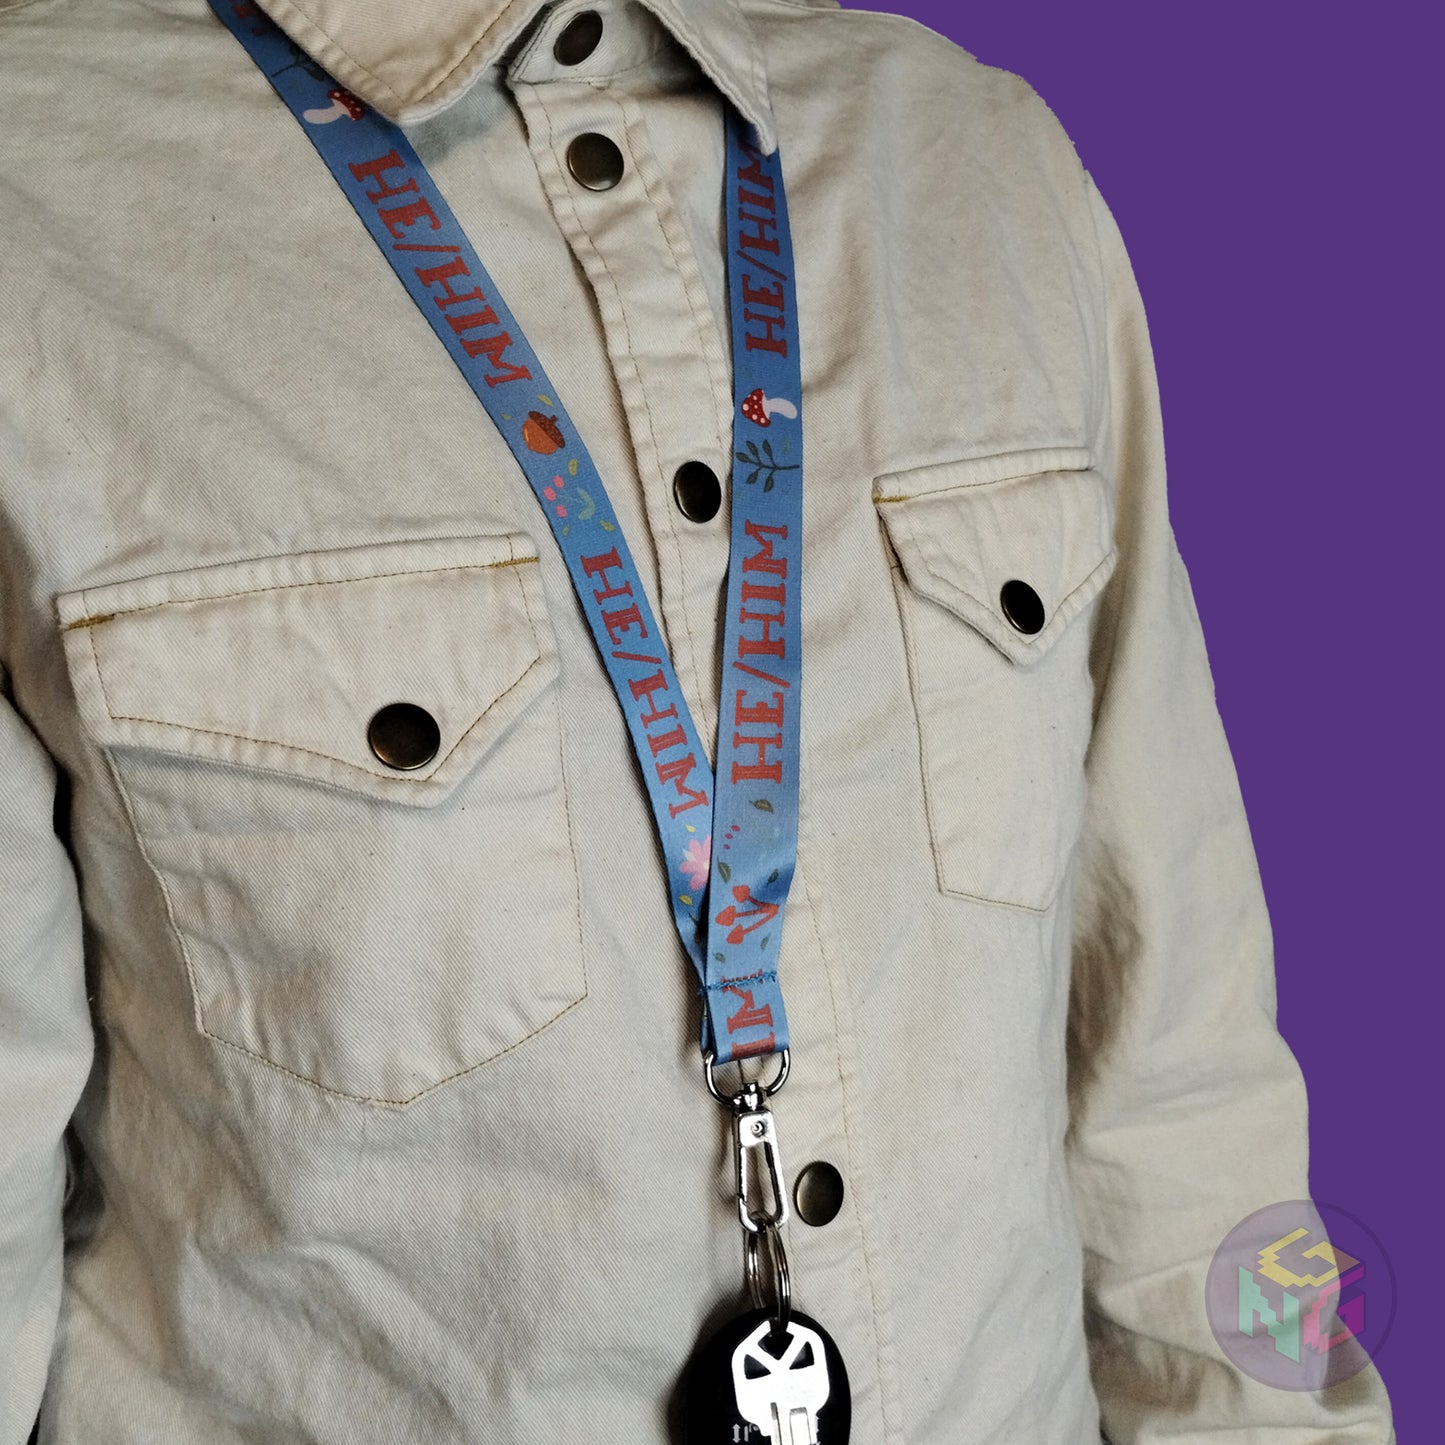 blue he him mushroom lanyard being worn by a flat chested person wearing a cream button up. The end of the lanyard falls between their sternum and bellybutton and has a key fob clipped to the end